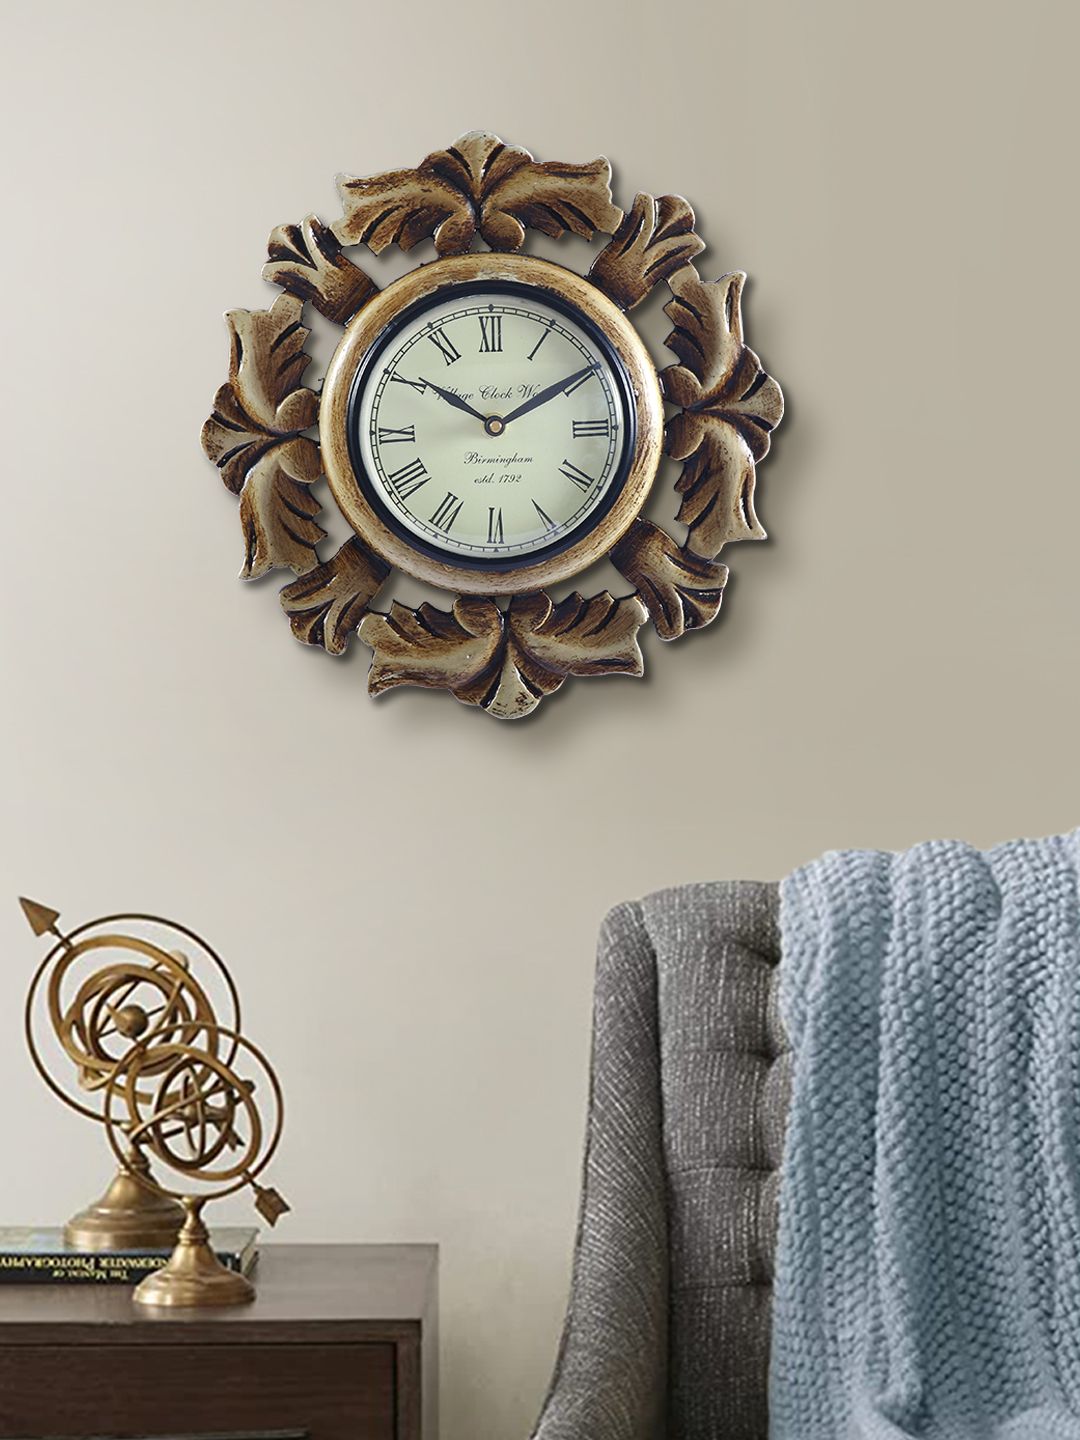 Aapno Rajasthan Copper-Toned & White Embellished Contemporary Wall Clock Price in India